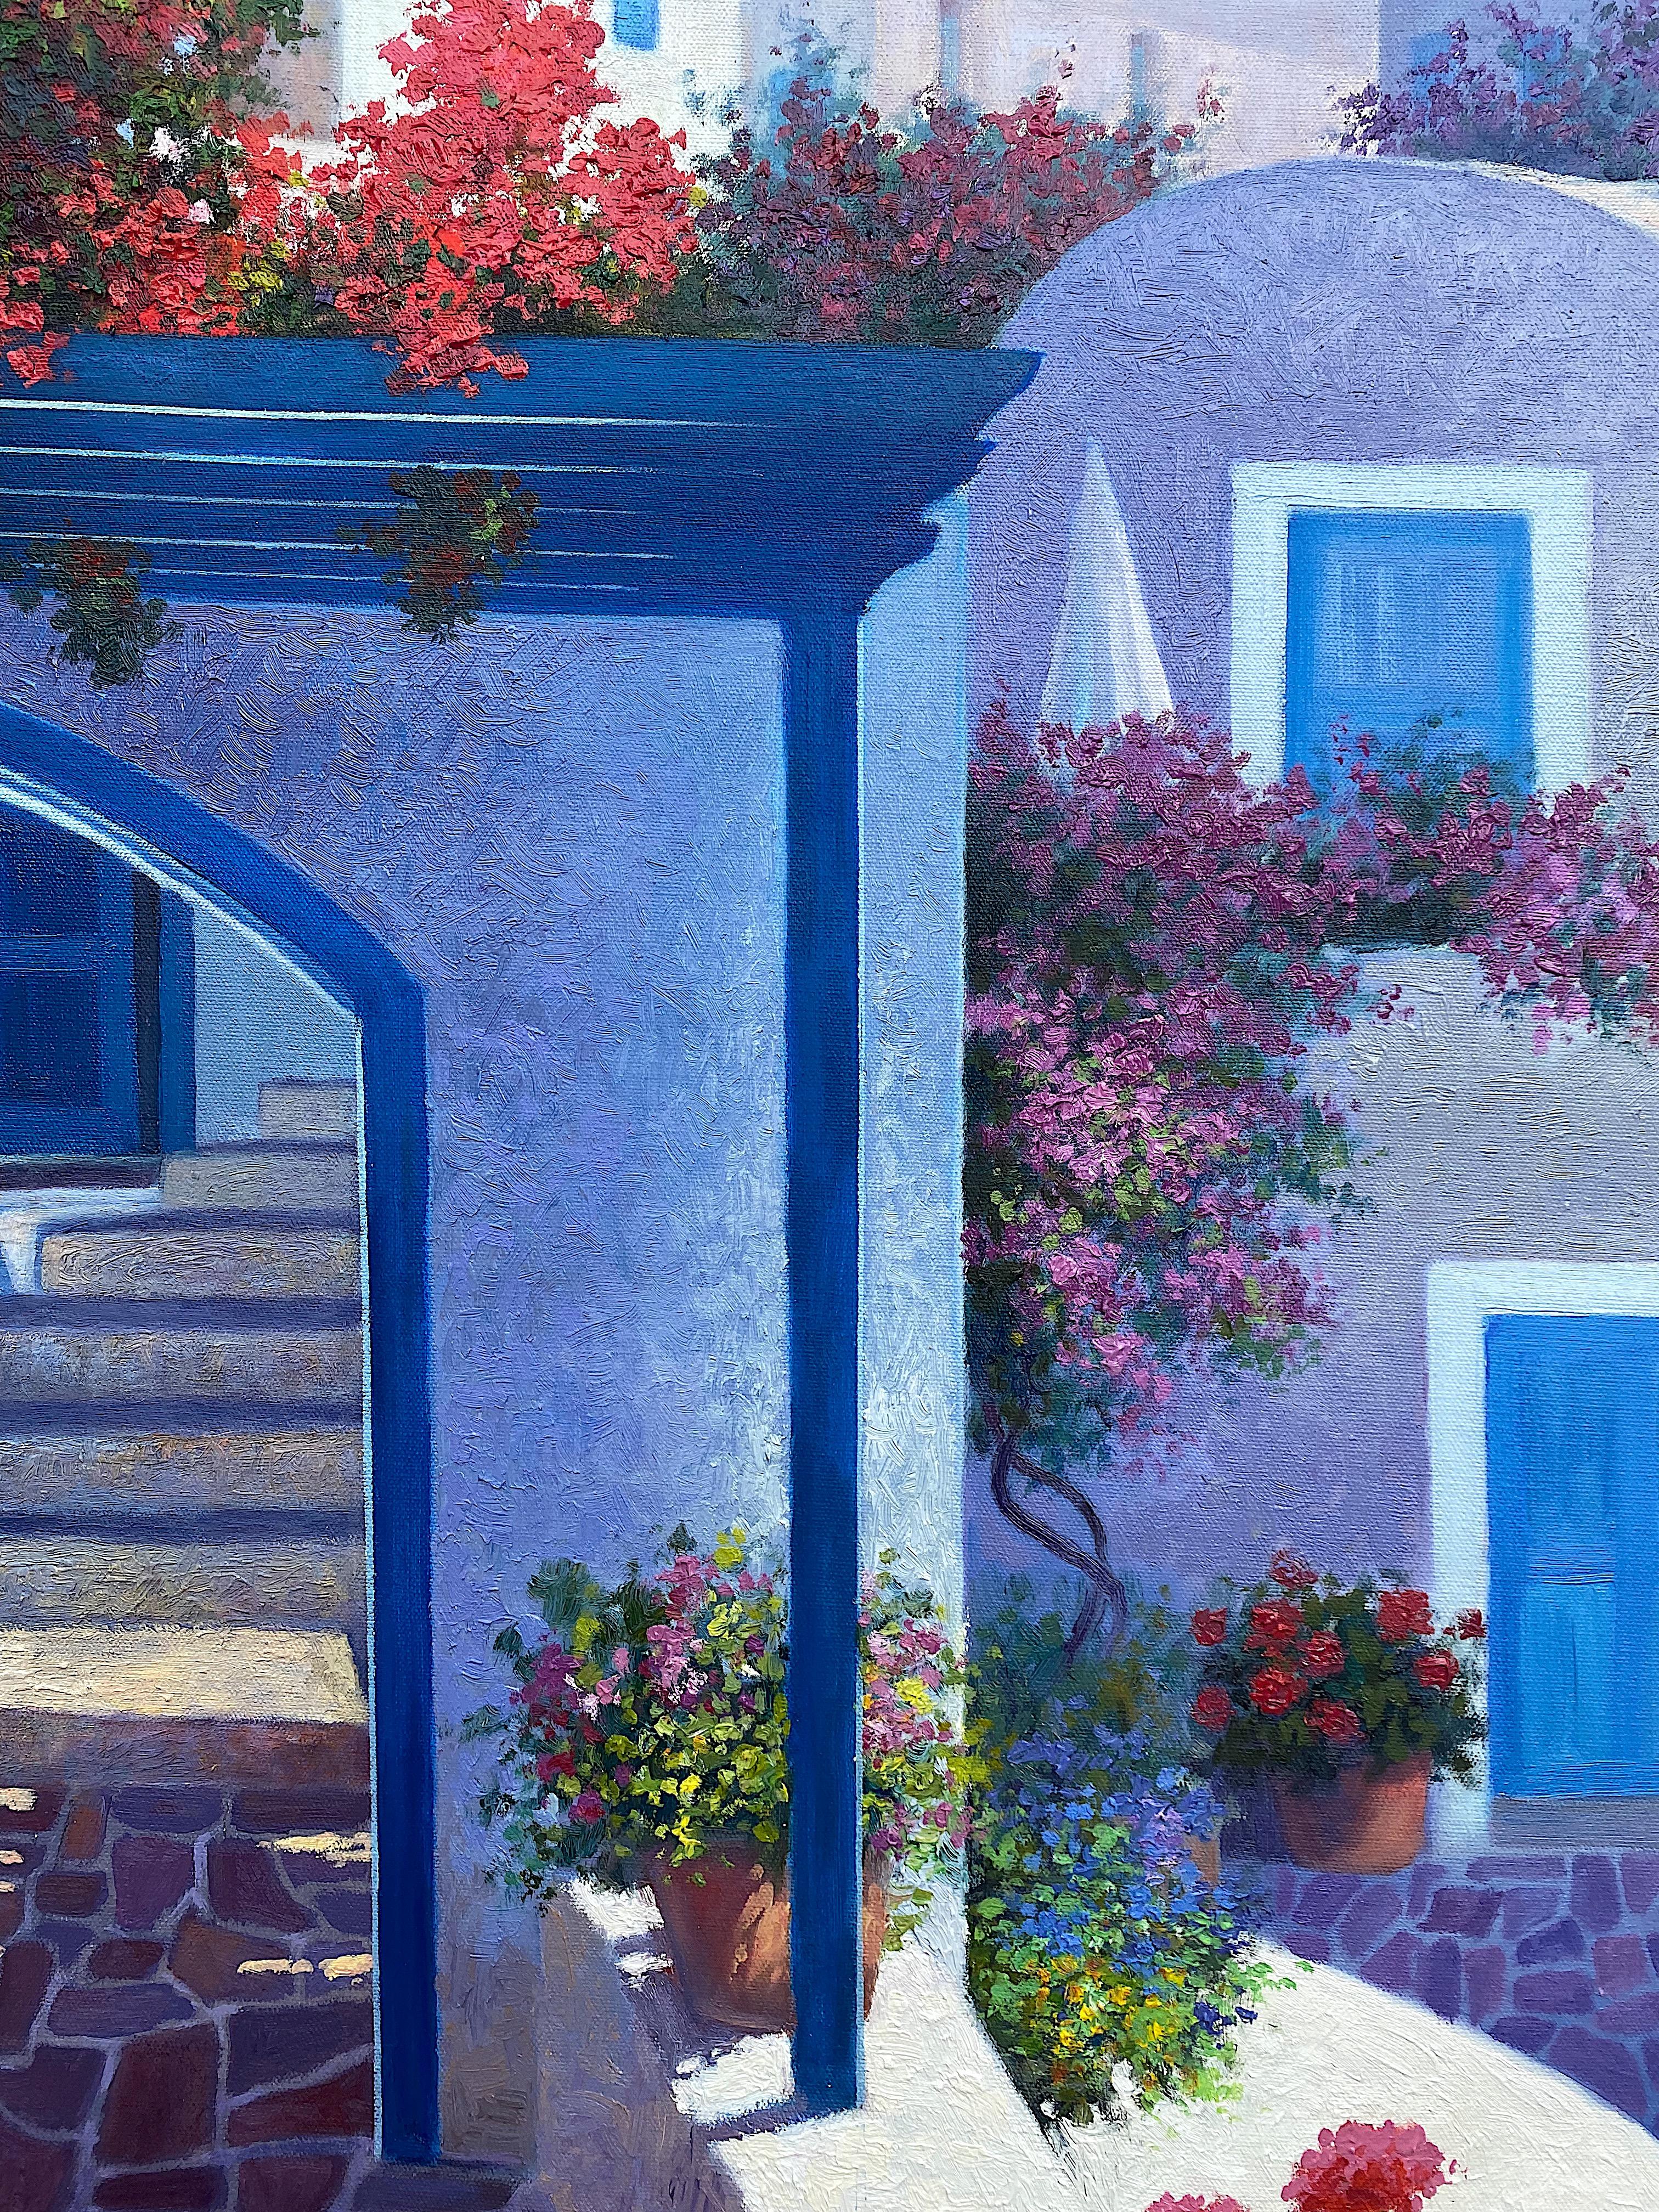 Sunny day in Greece with bougainvilleas - Original oil painting - Impressionist - Painting by Sonco Carrasco